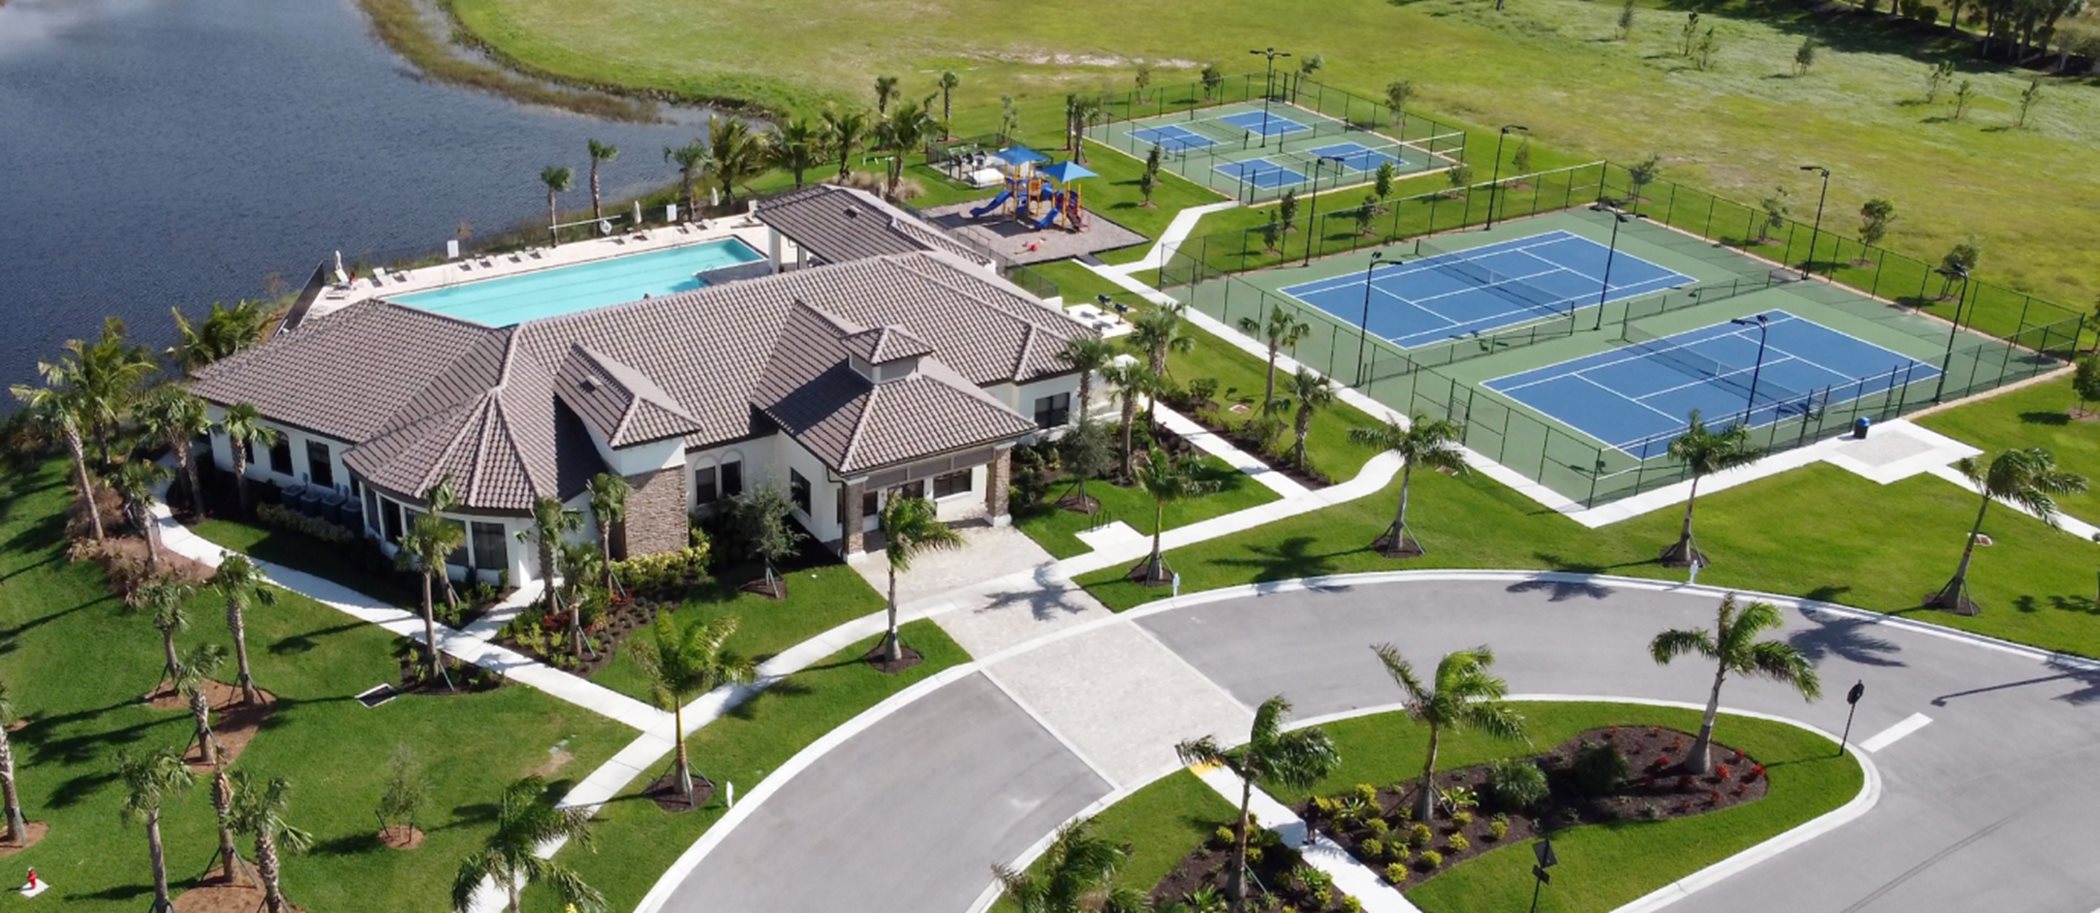 Aerial view of Portico's Clubhouse, Swimming Pool, and Tennis court